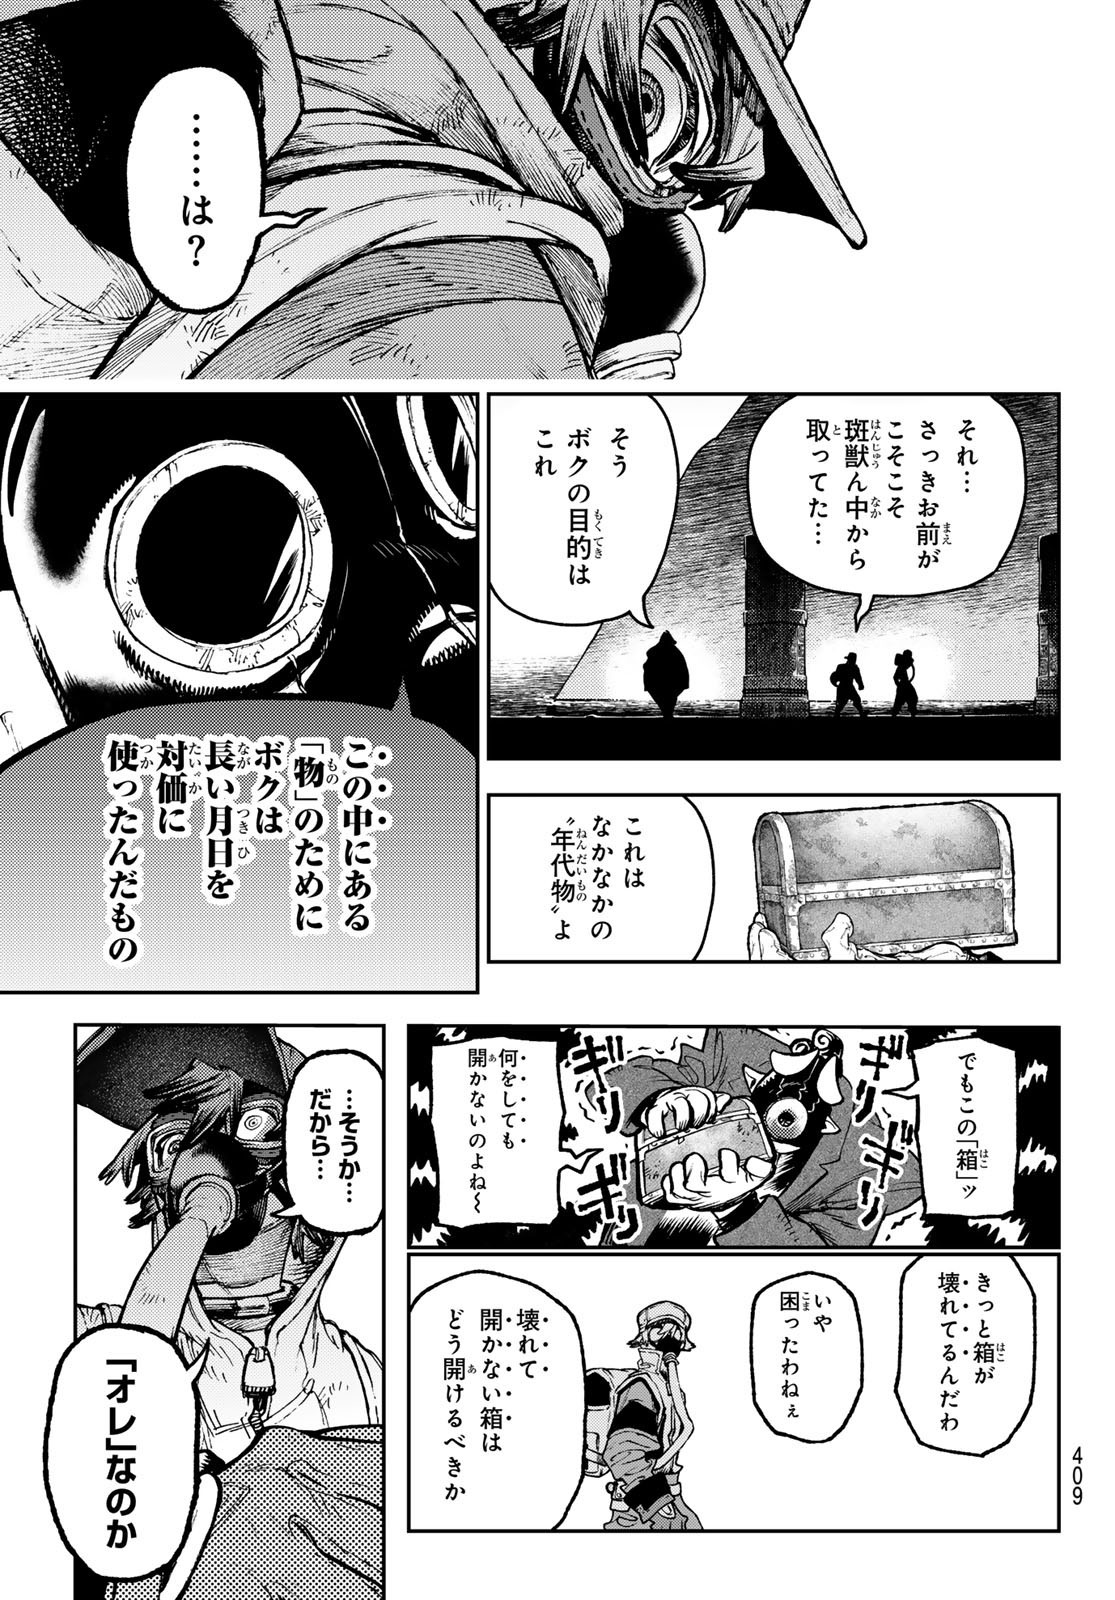 Weekly Shōnen Magazine - 週刊少年マガジン - Chapter 2024-33 - Page 407